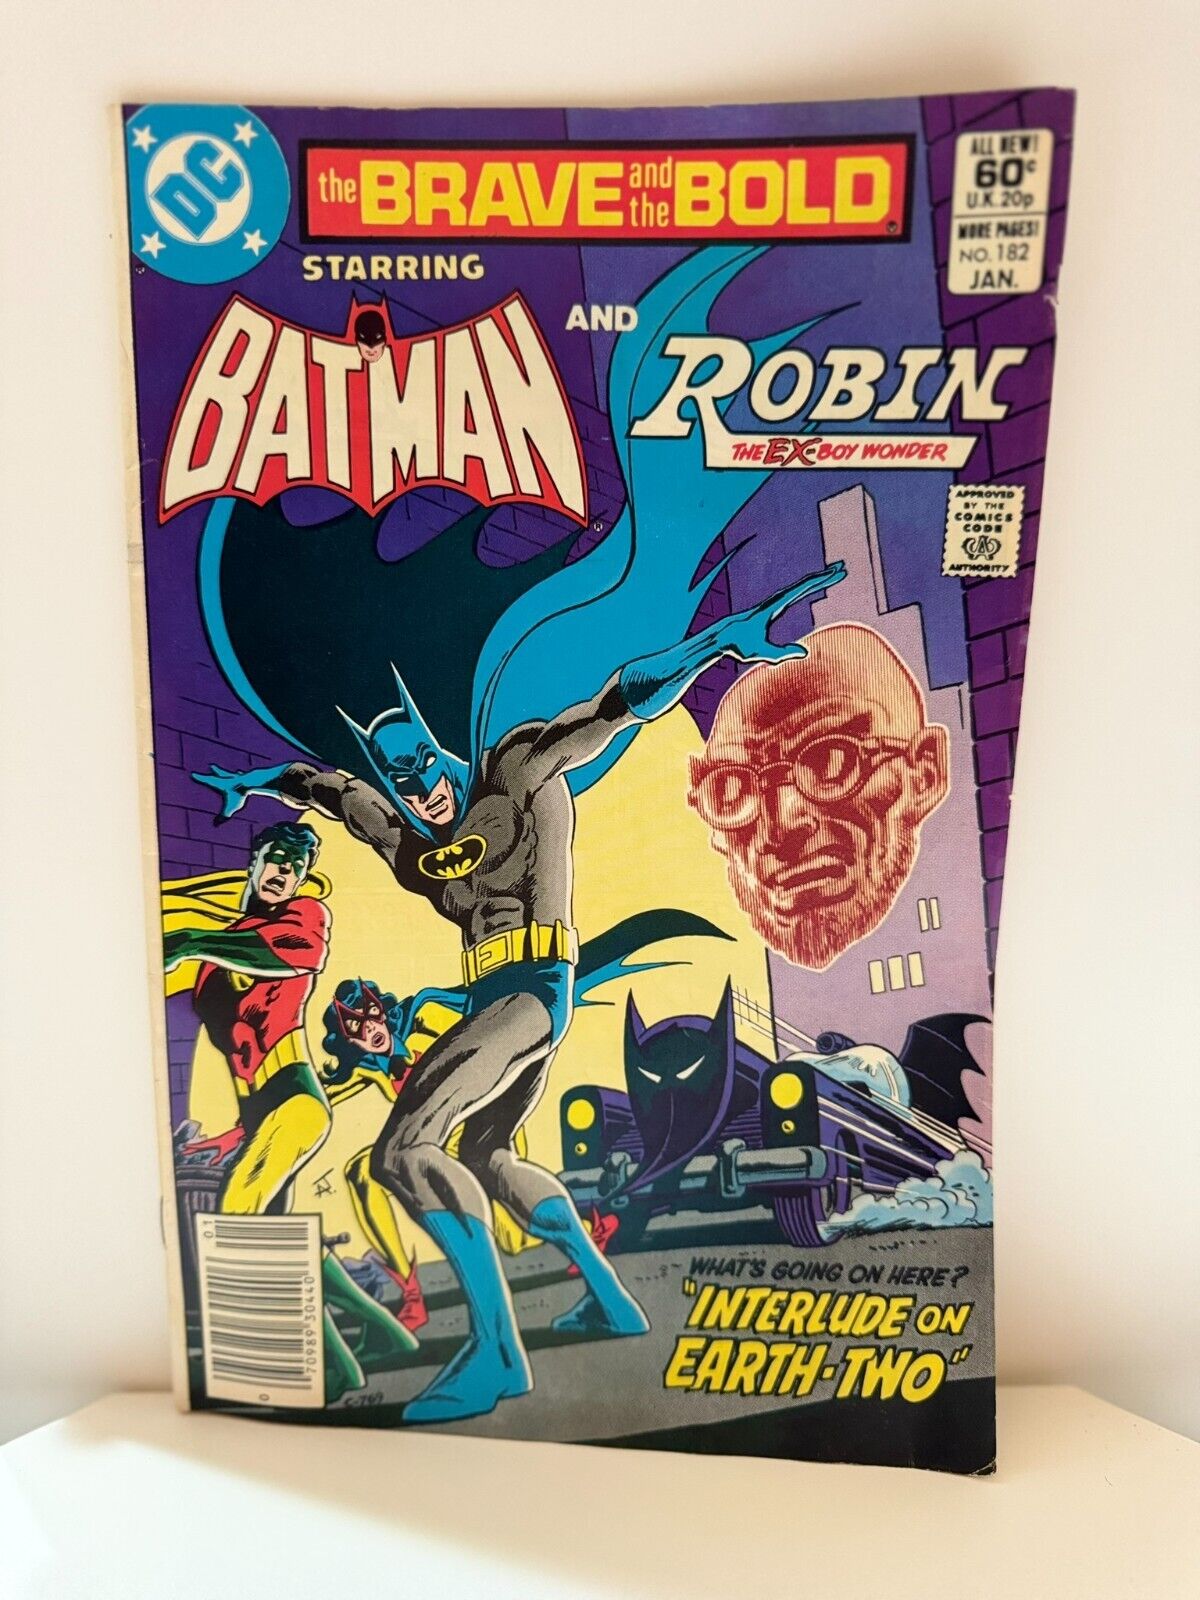 The Brave and The Bold #182 Batman and Robin DC Comics